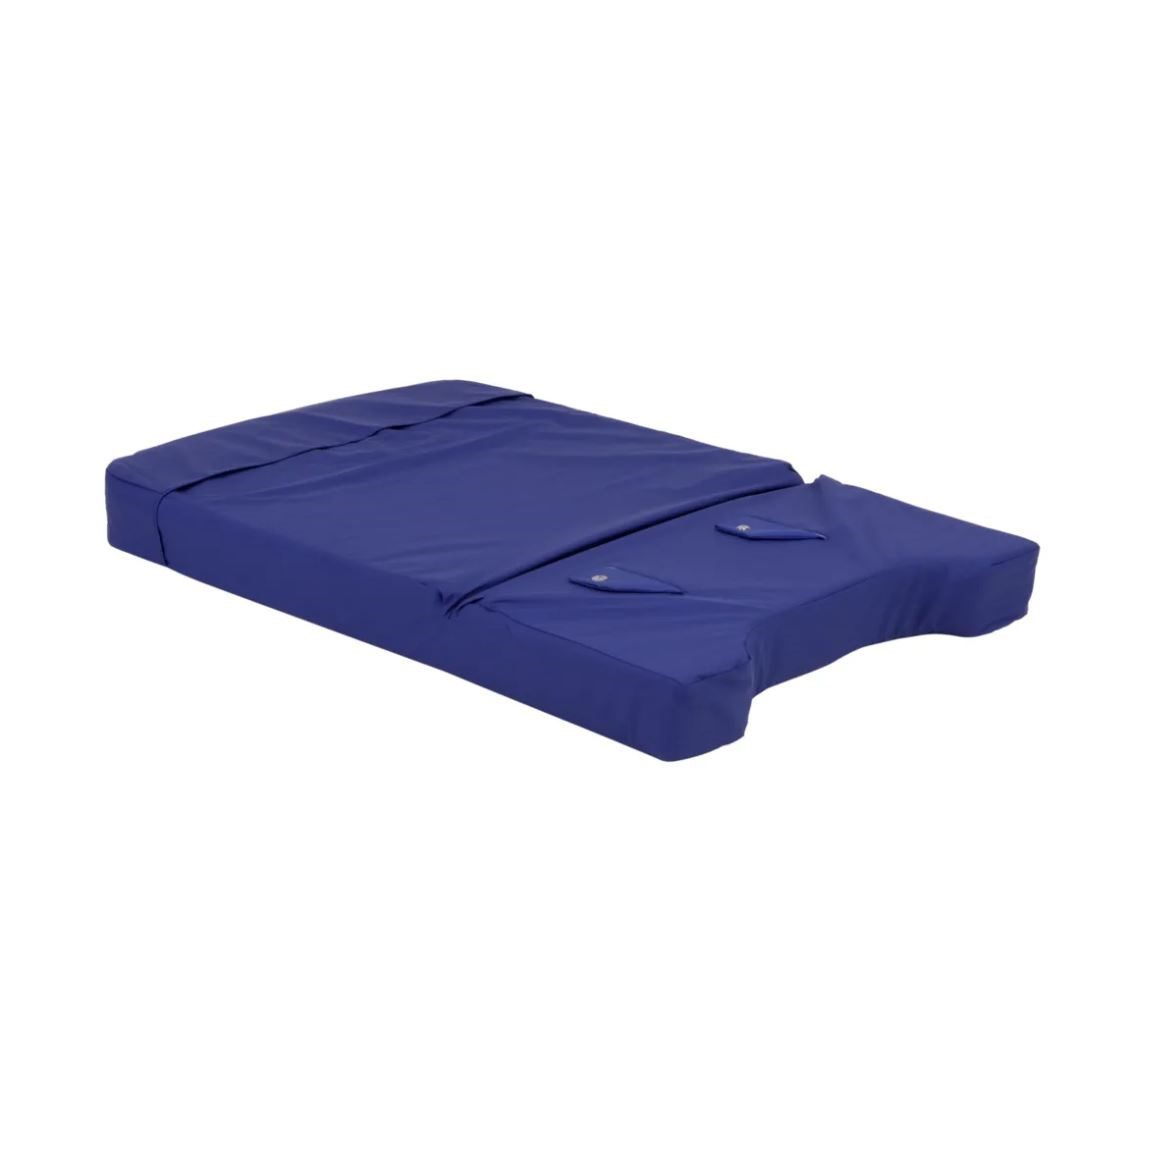 Hillrom Original Affinity Birthing Bed Replacement Pad – Head U-Cut